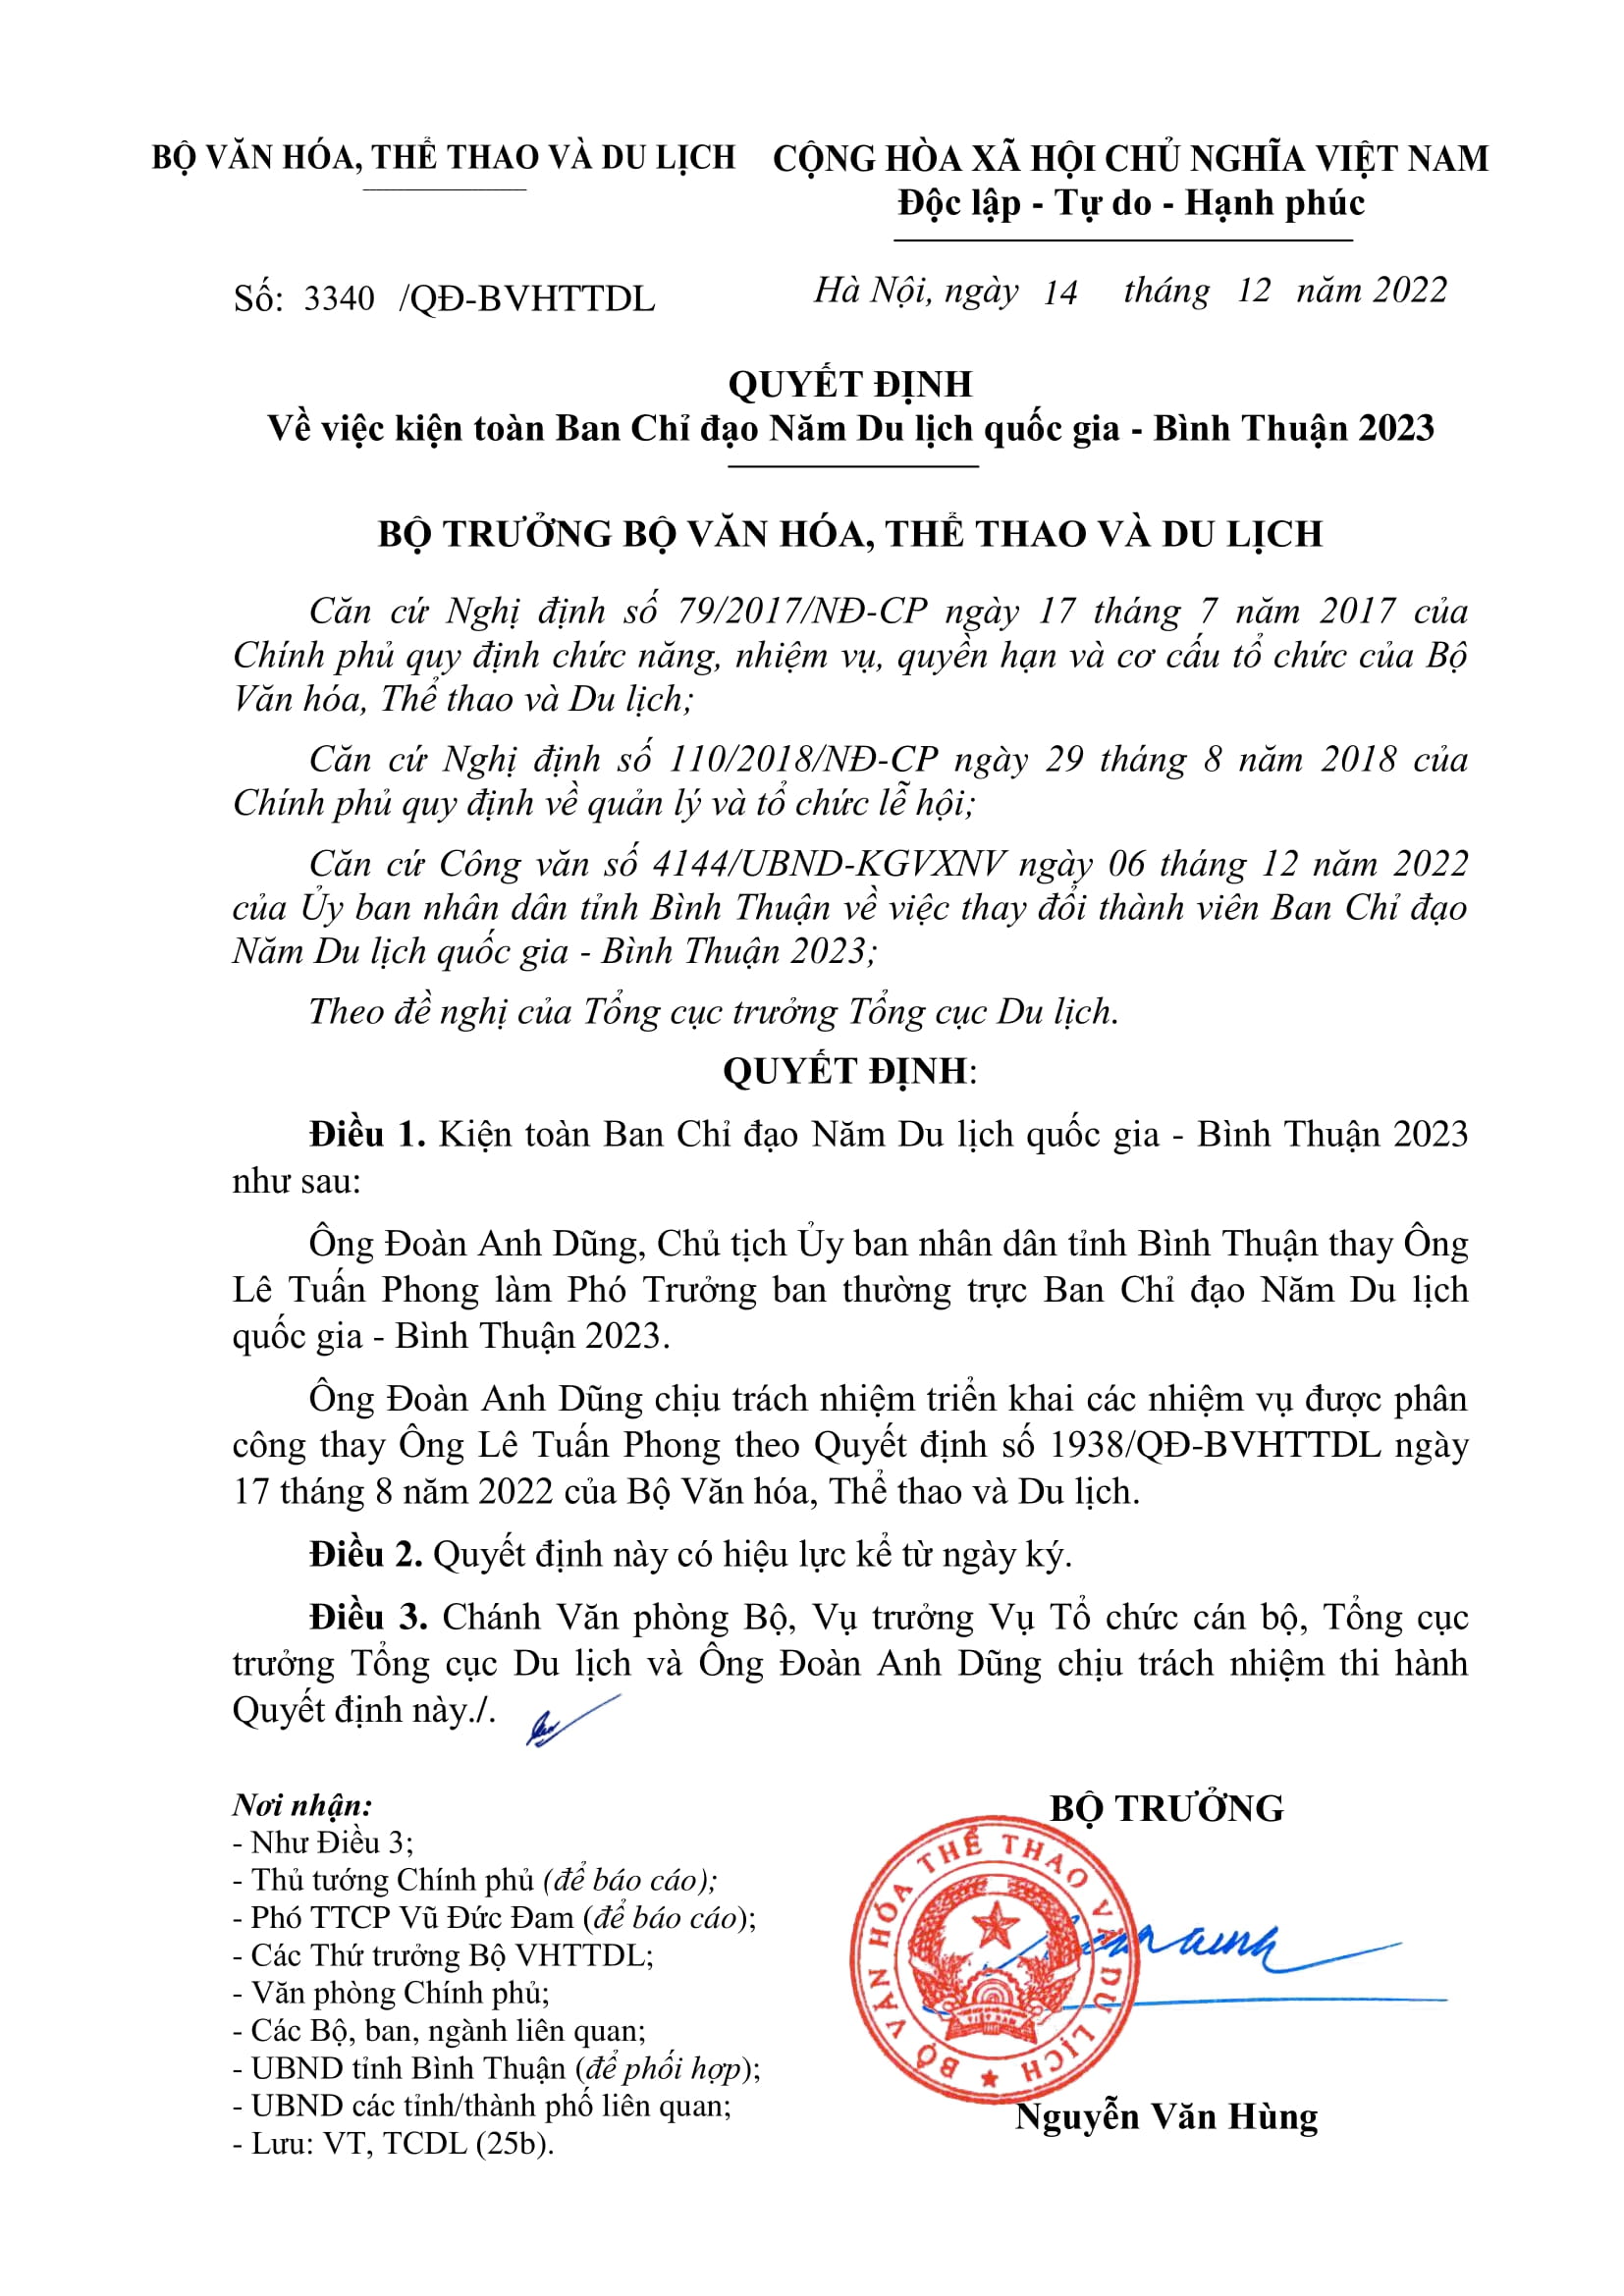 DECISION - On consolidating the National Tourism Year Steering Committee - Binh Thuan 2023.